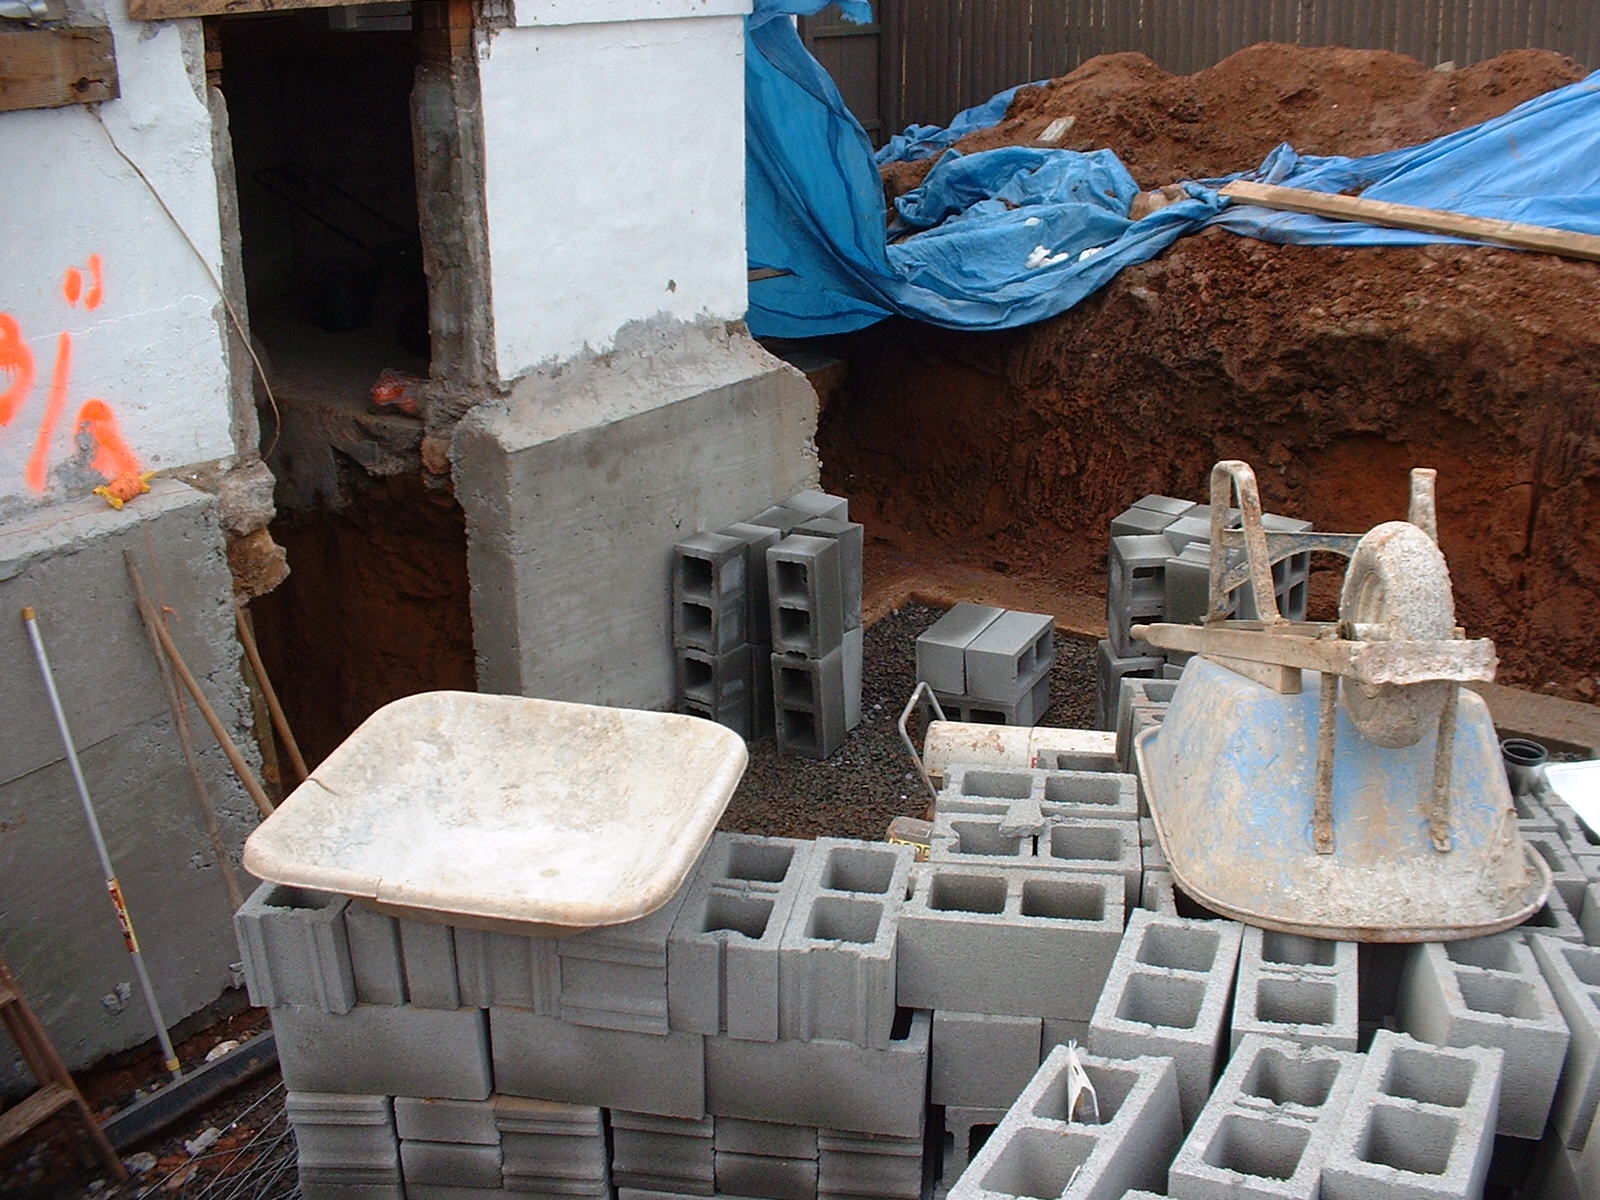 In this picture you can see the concrete is poured to support the existing walls.